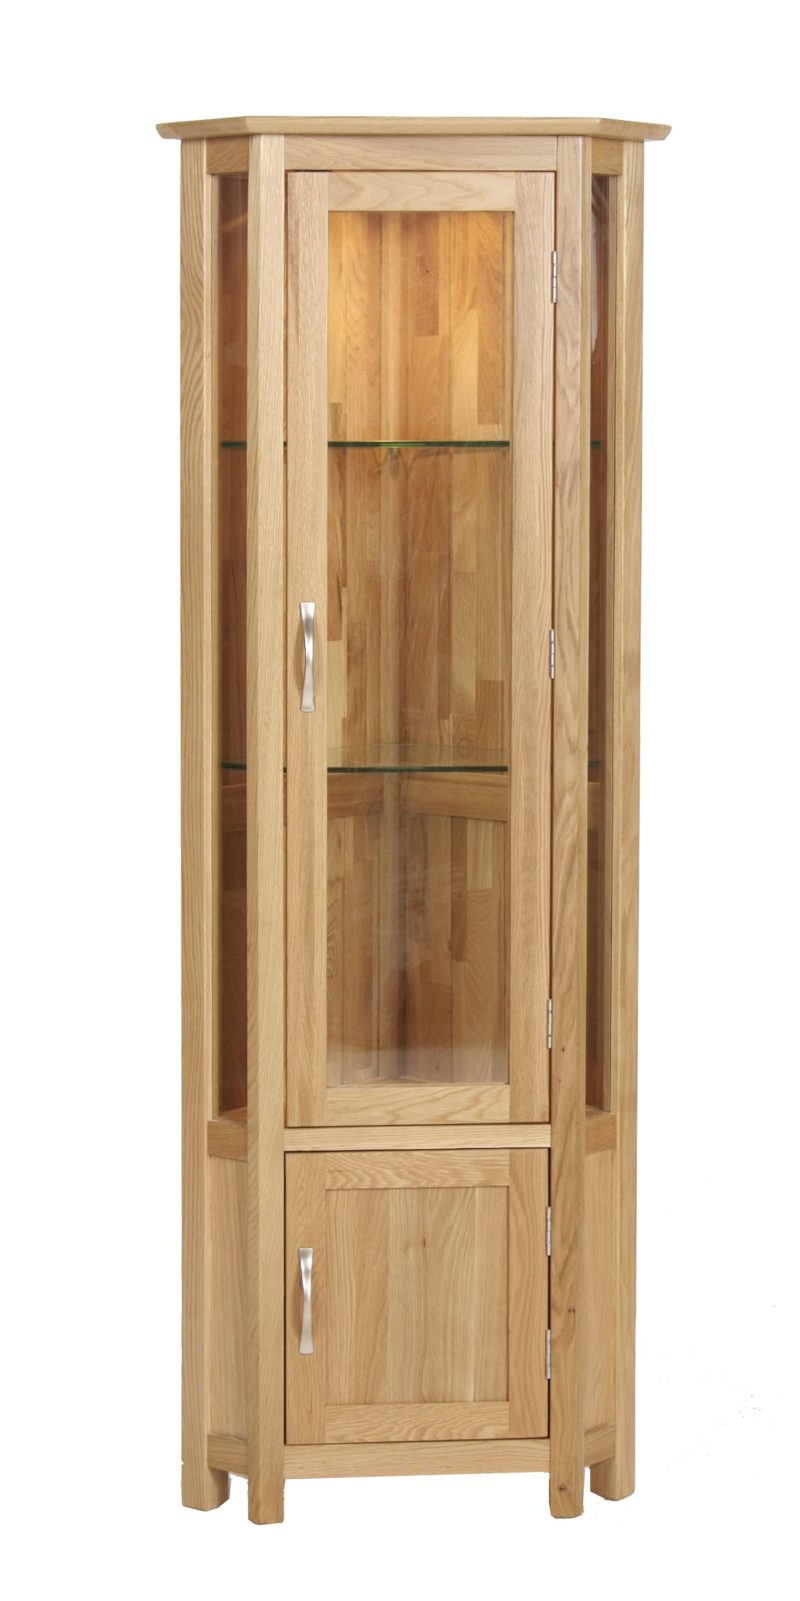 Norwich Oak Glass Corner Display Cabinet. contemporary shaker style straight lines and shaped edges on tops. shaped chrome bar handles.Glass shelves are adjustable. 1 handy door under with adjustable shelf. NNG45